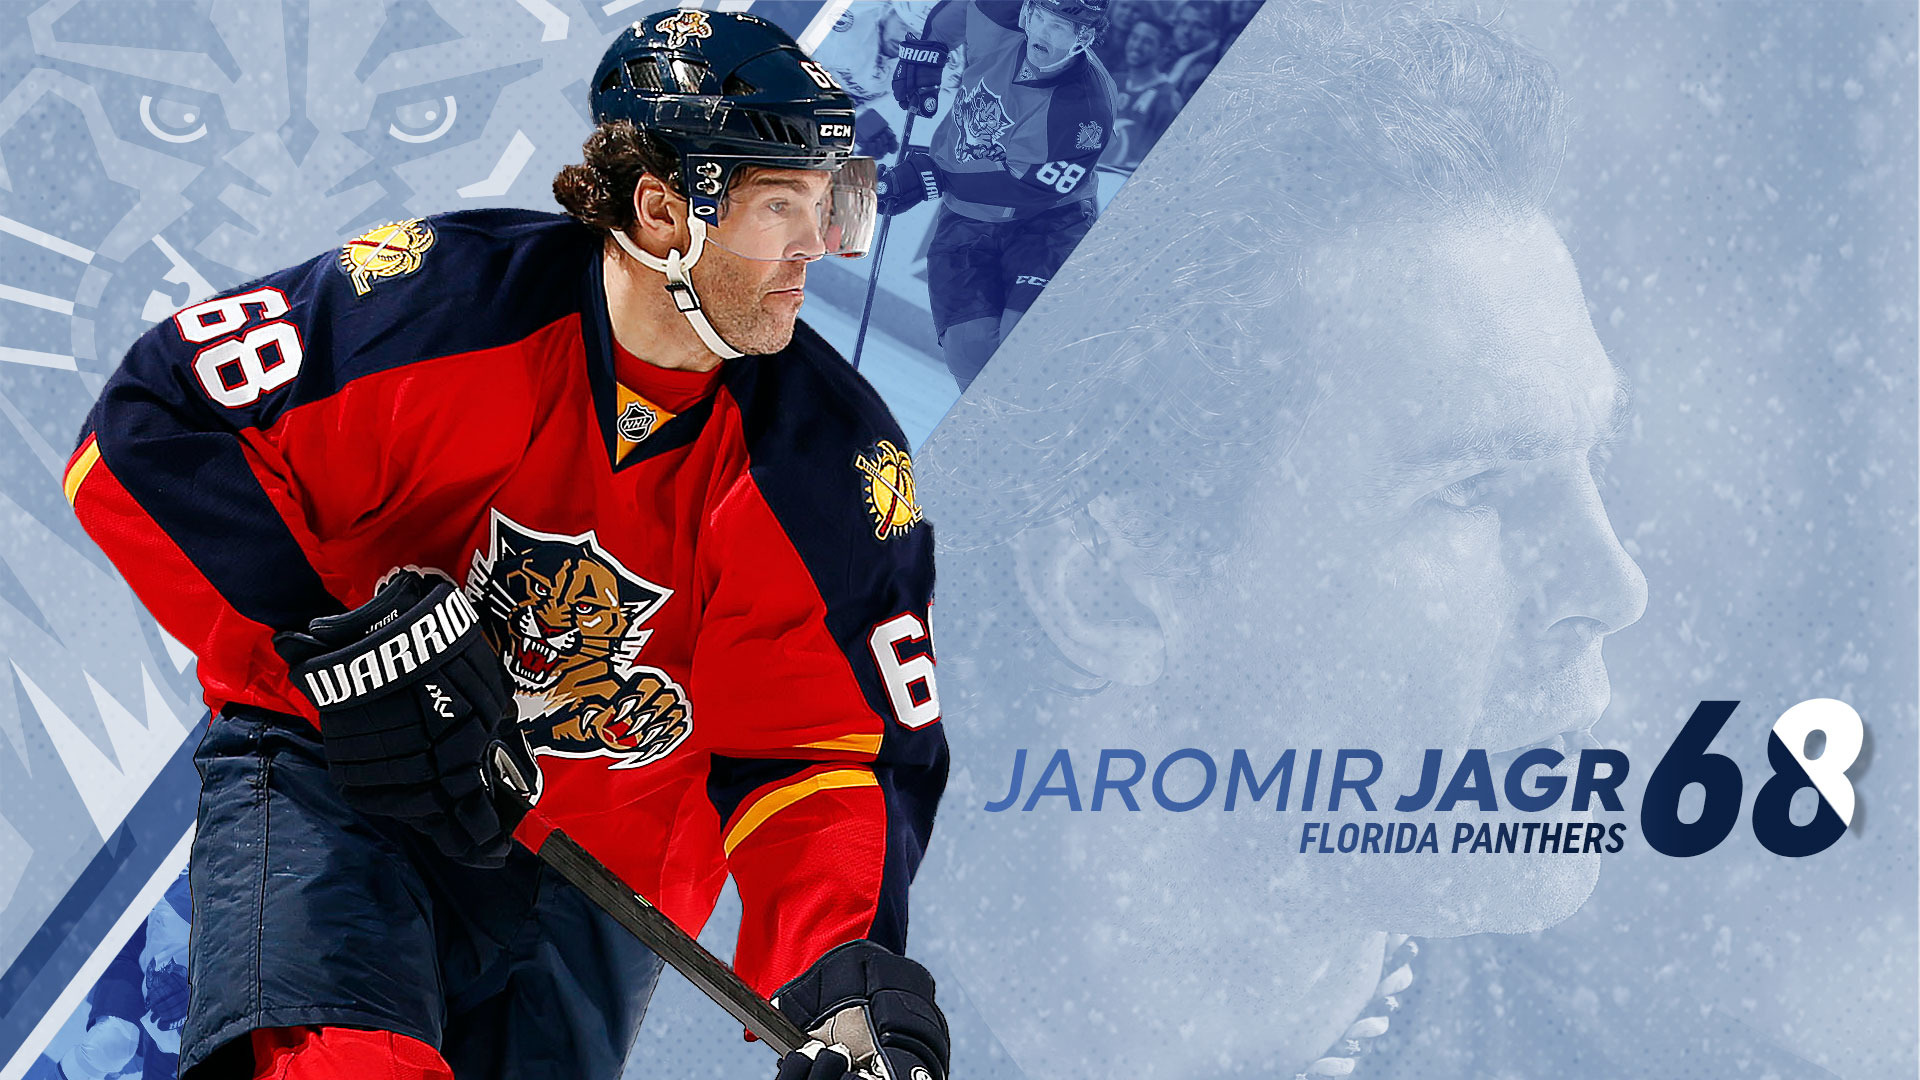 Panthers Wallpapers   Florida Panthers   Fan Zone 1920x1080